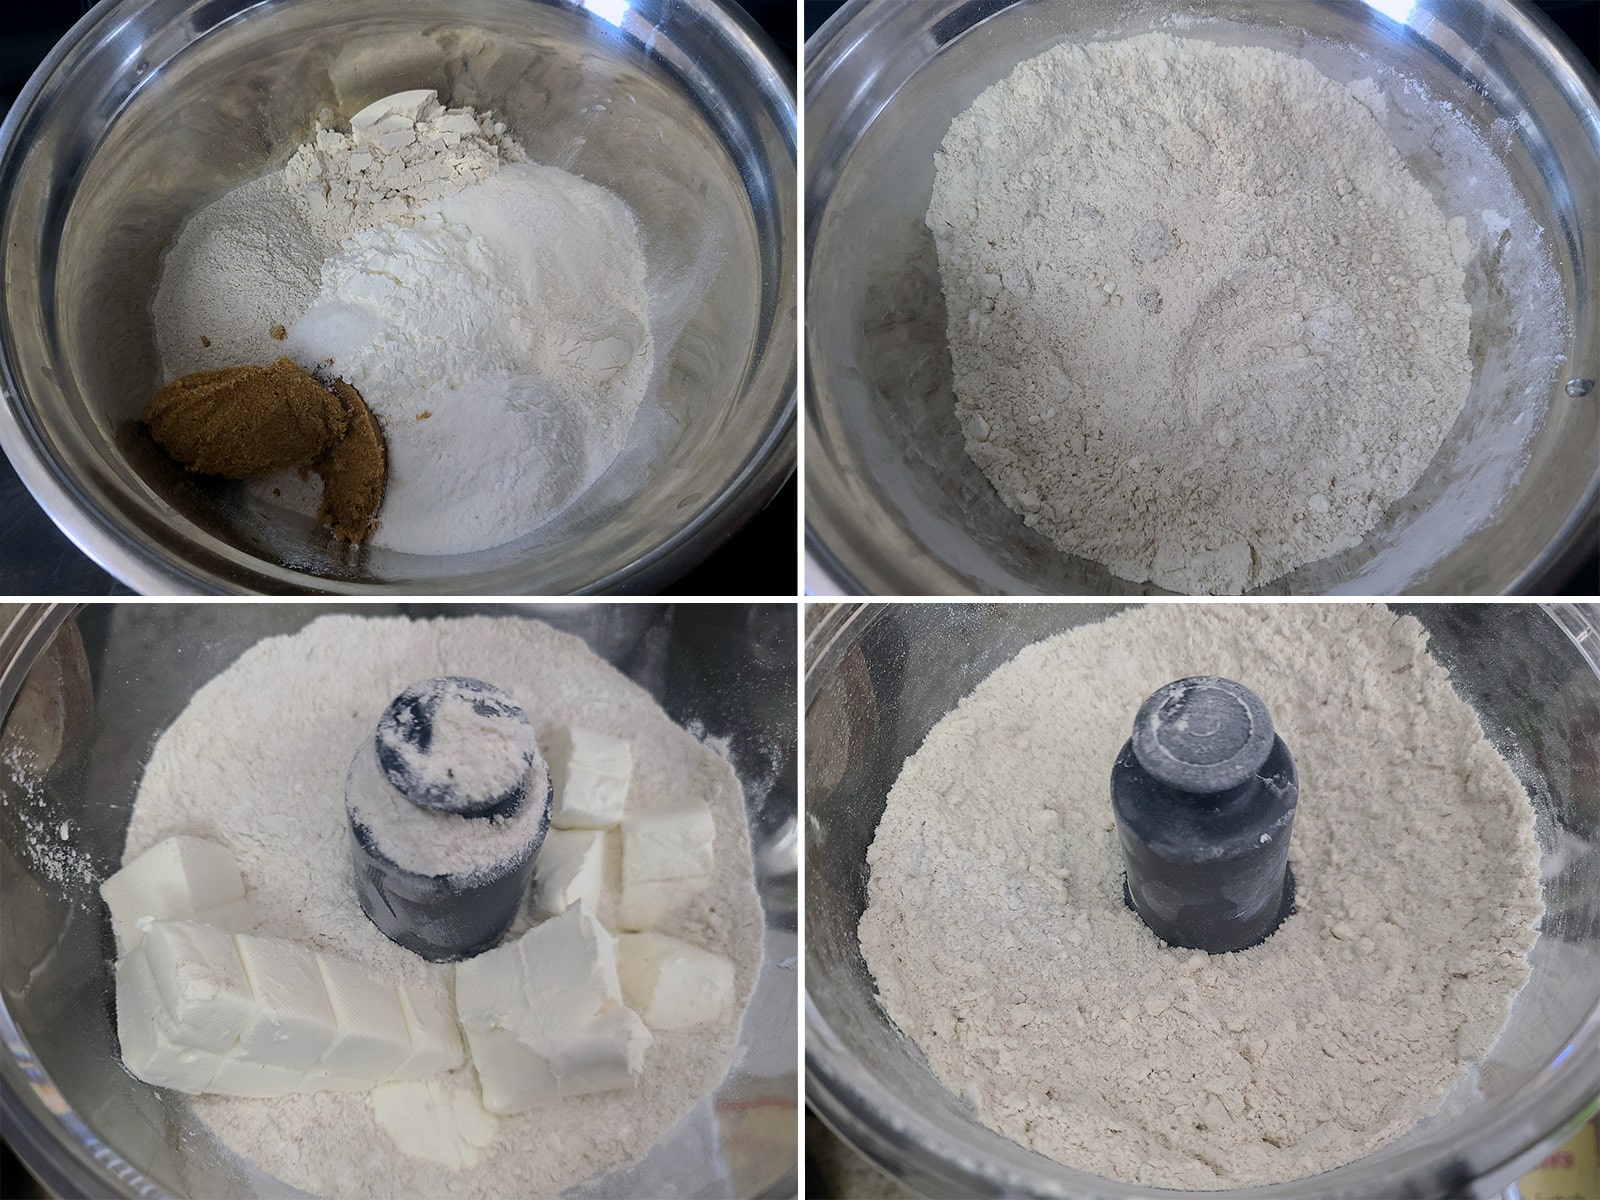 A 4 part image showing the dry ingredients and cream cheese being mixed in a food processor.